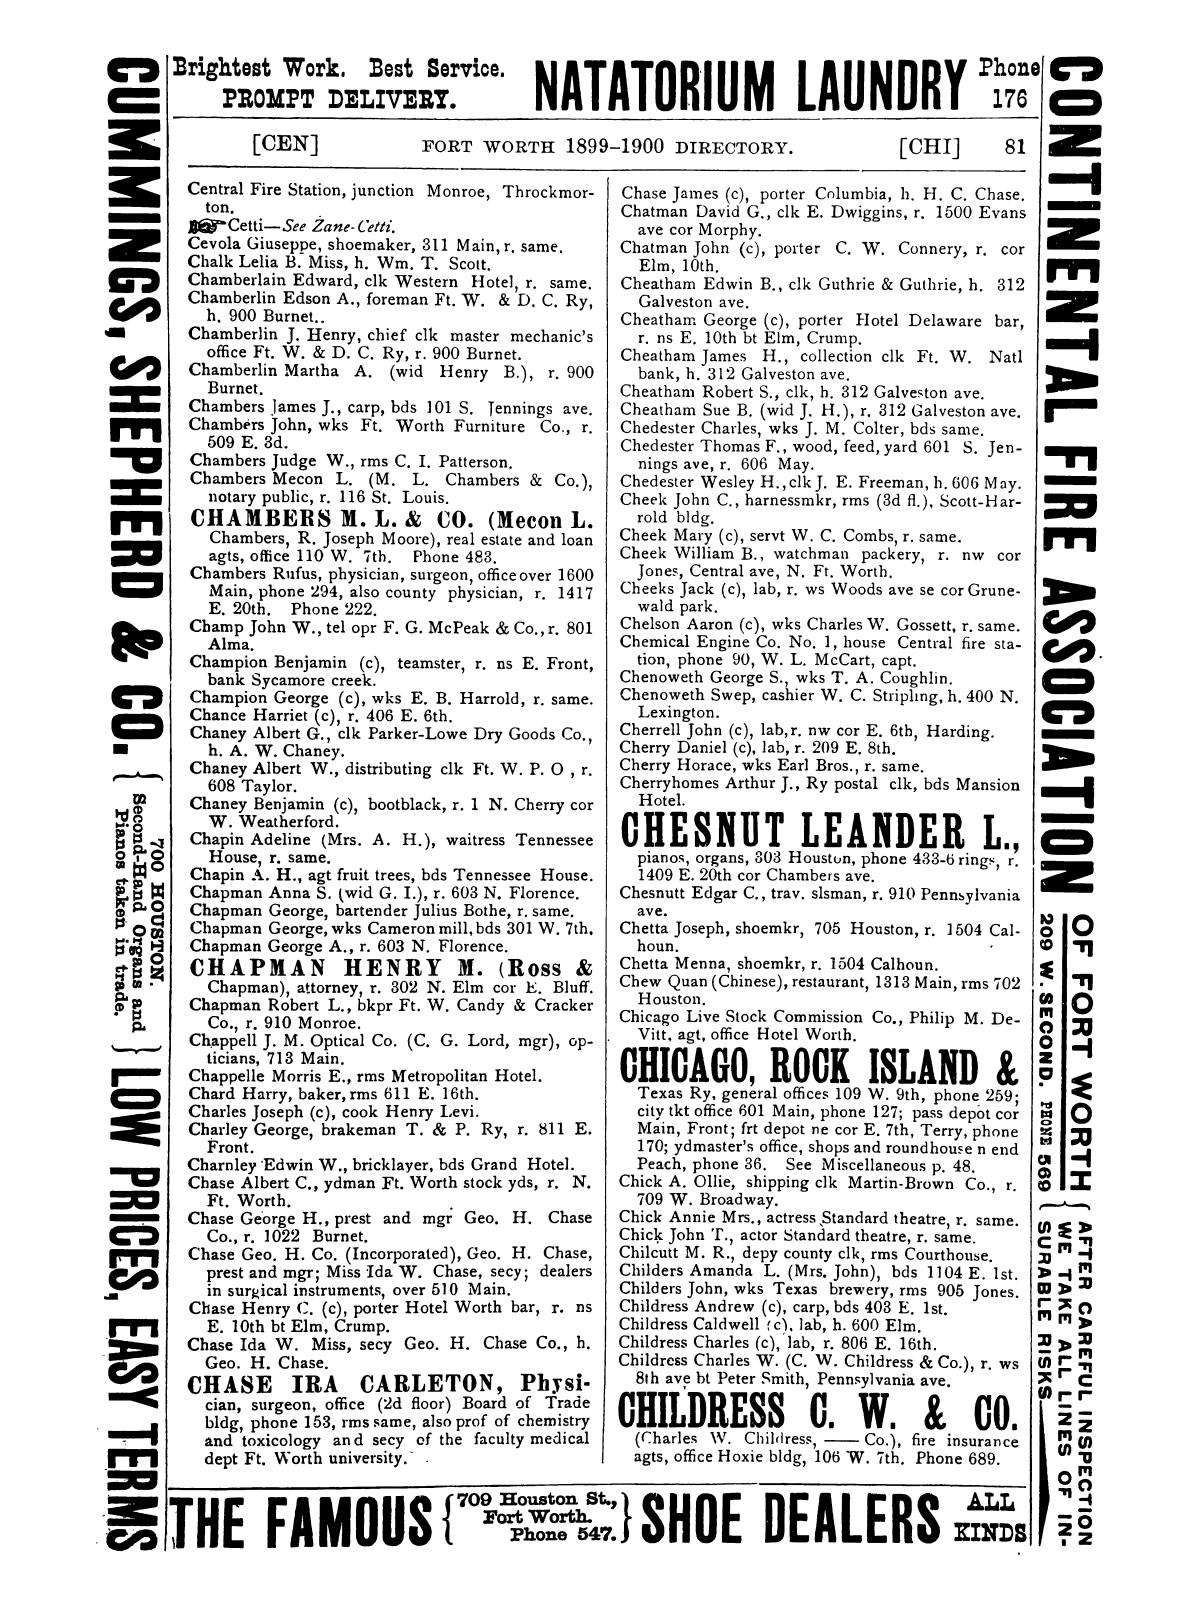 Morrison & Fourmy's General Directory of the City of Fort Worth 1899-1900.
                                                
                                                    81
                                                